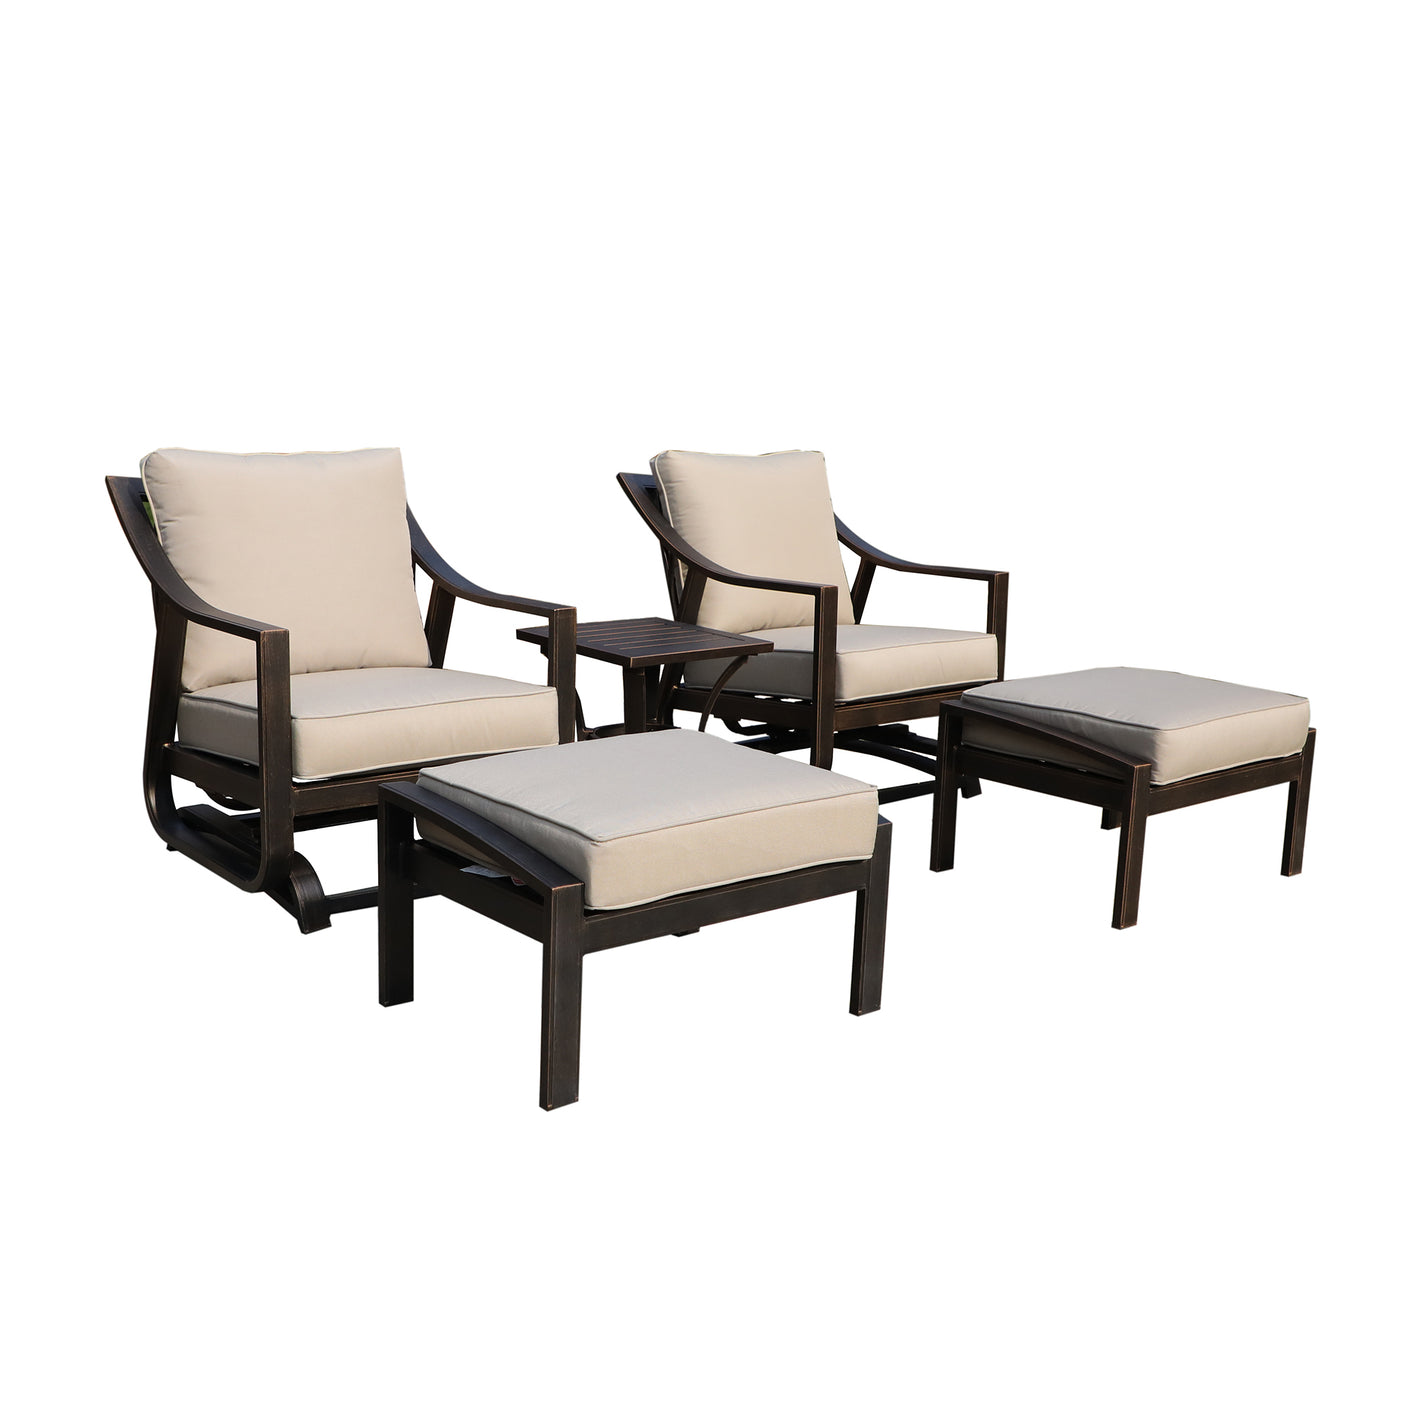 5 Piece Lounge Set with Motion Chairs, Liberty Bronze